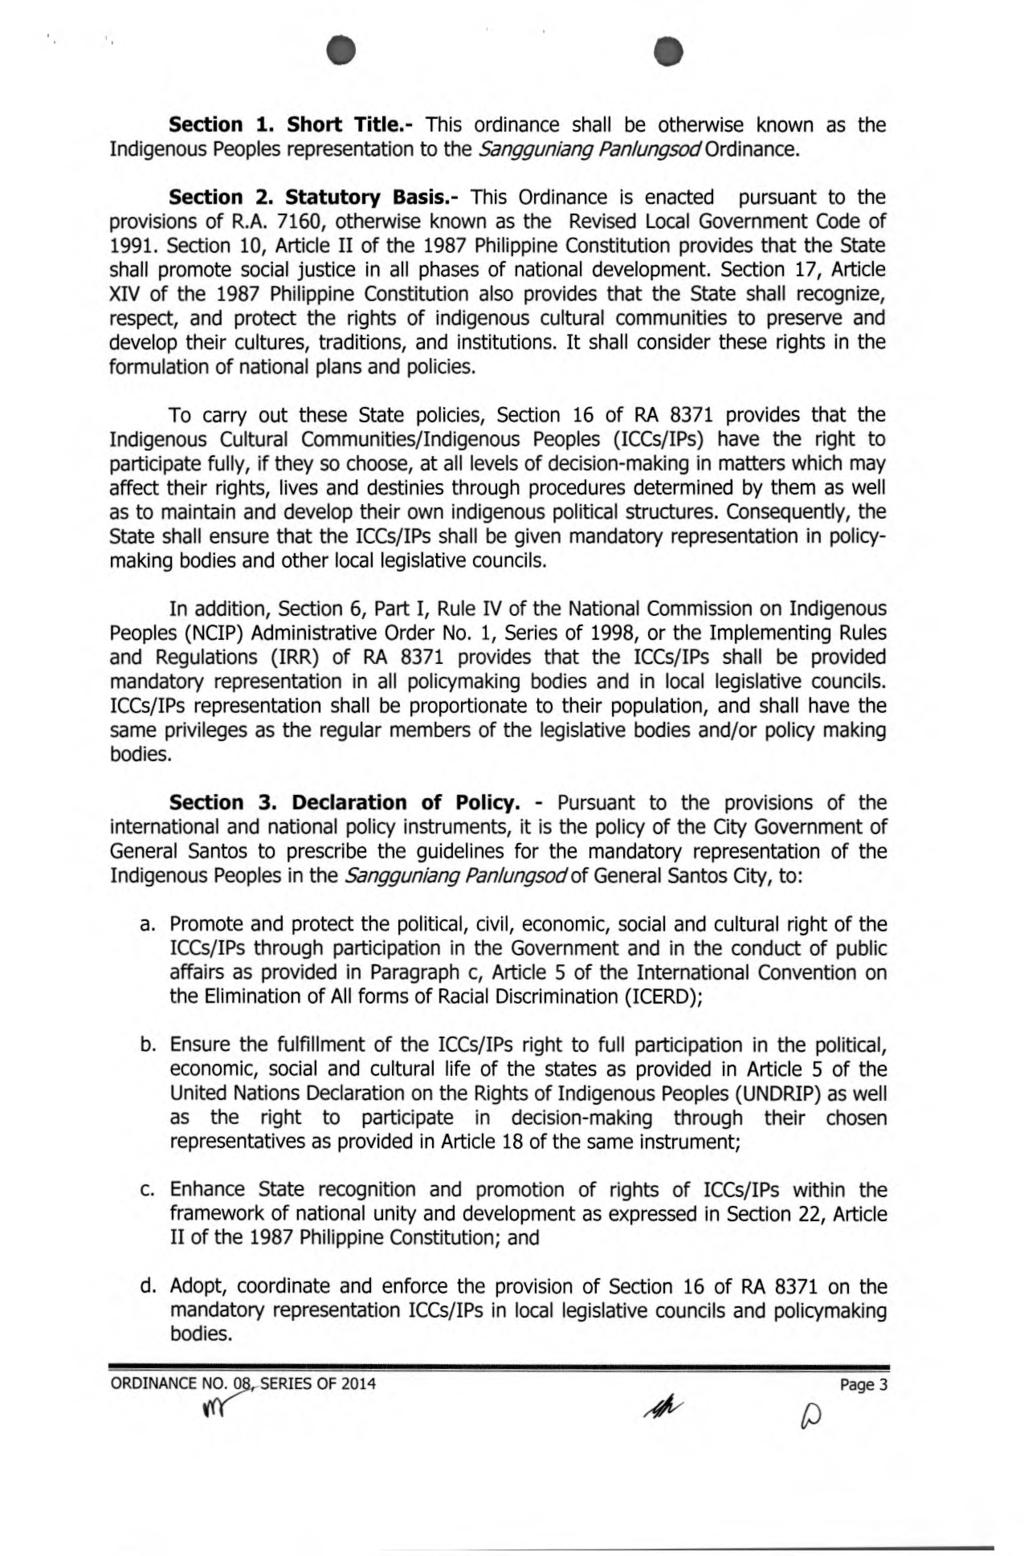 Section 1. Short Title.- This ordinance shall be otherwise known as the Indigenous Peoples representation to the Sangguniang Panlungsod Ordinance. Section 2. Statutory Basis.